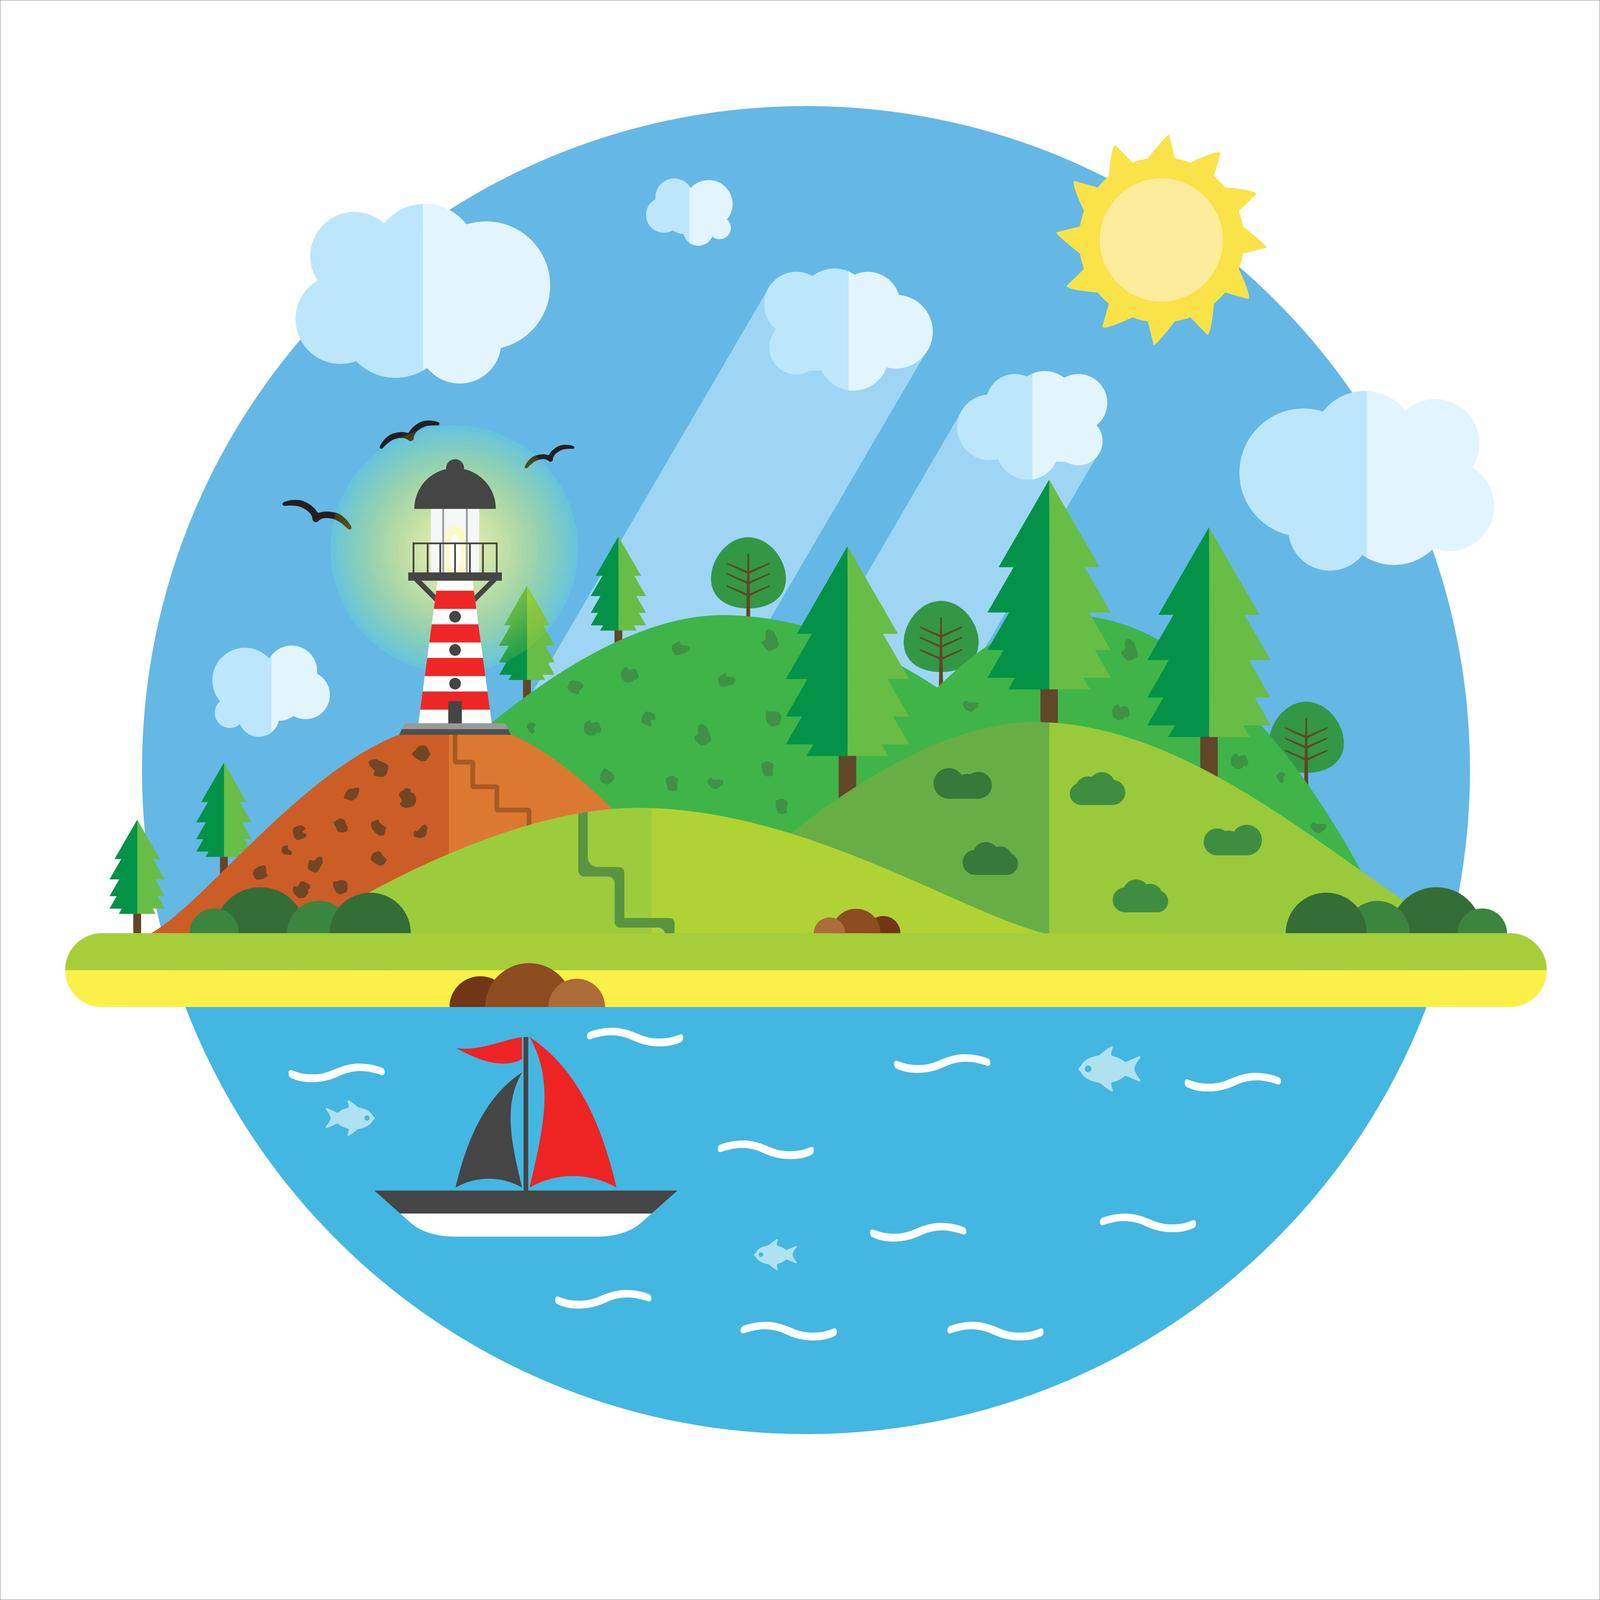 Vacation in the sea with lighthouse, hill, tree, mountain, fish and sailing ship. Summer time holiday voyage concept. Illustration in flat style. Travel background.